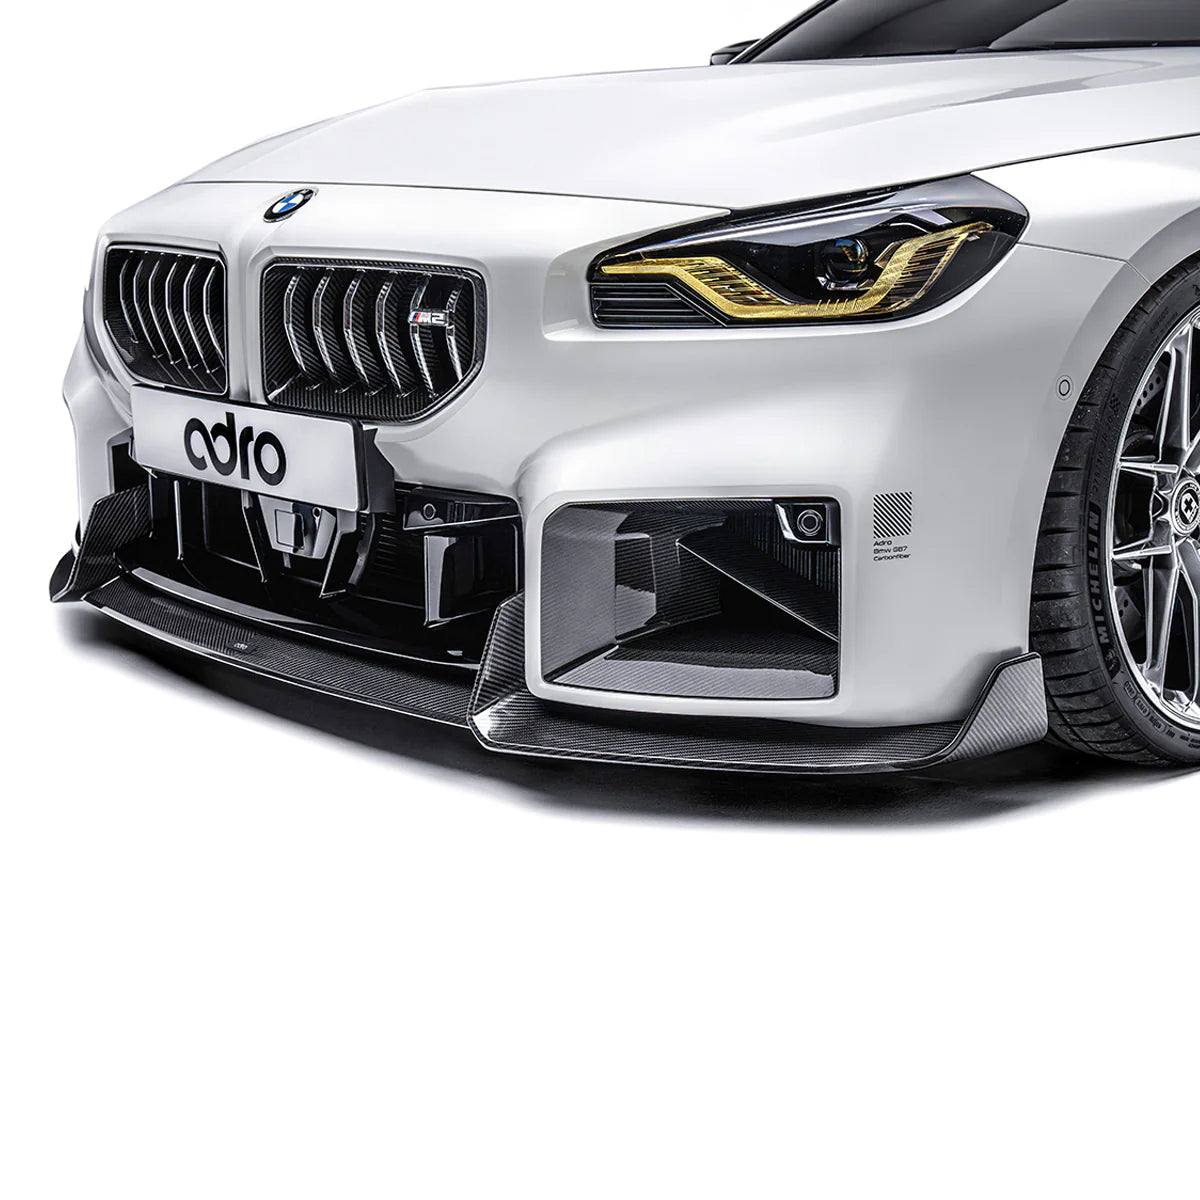 ADRO BMW G87 M2 FRONT LIP - PREORDER NOW!